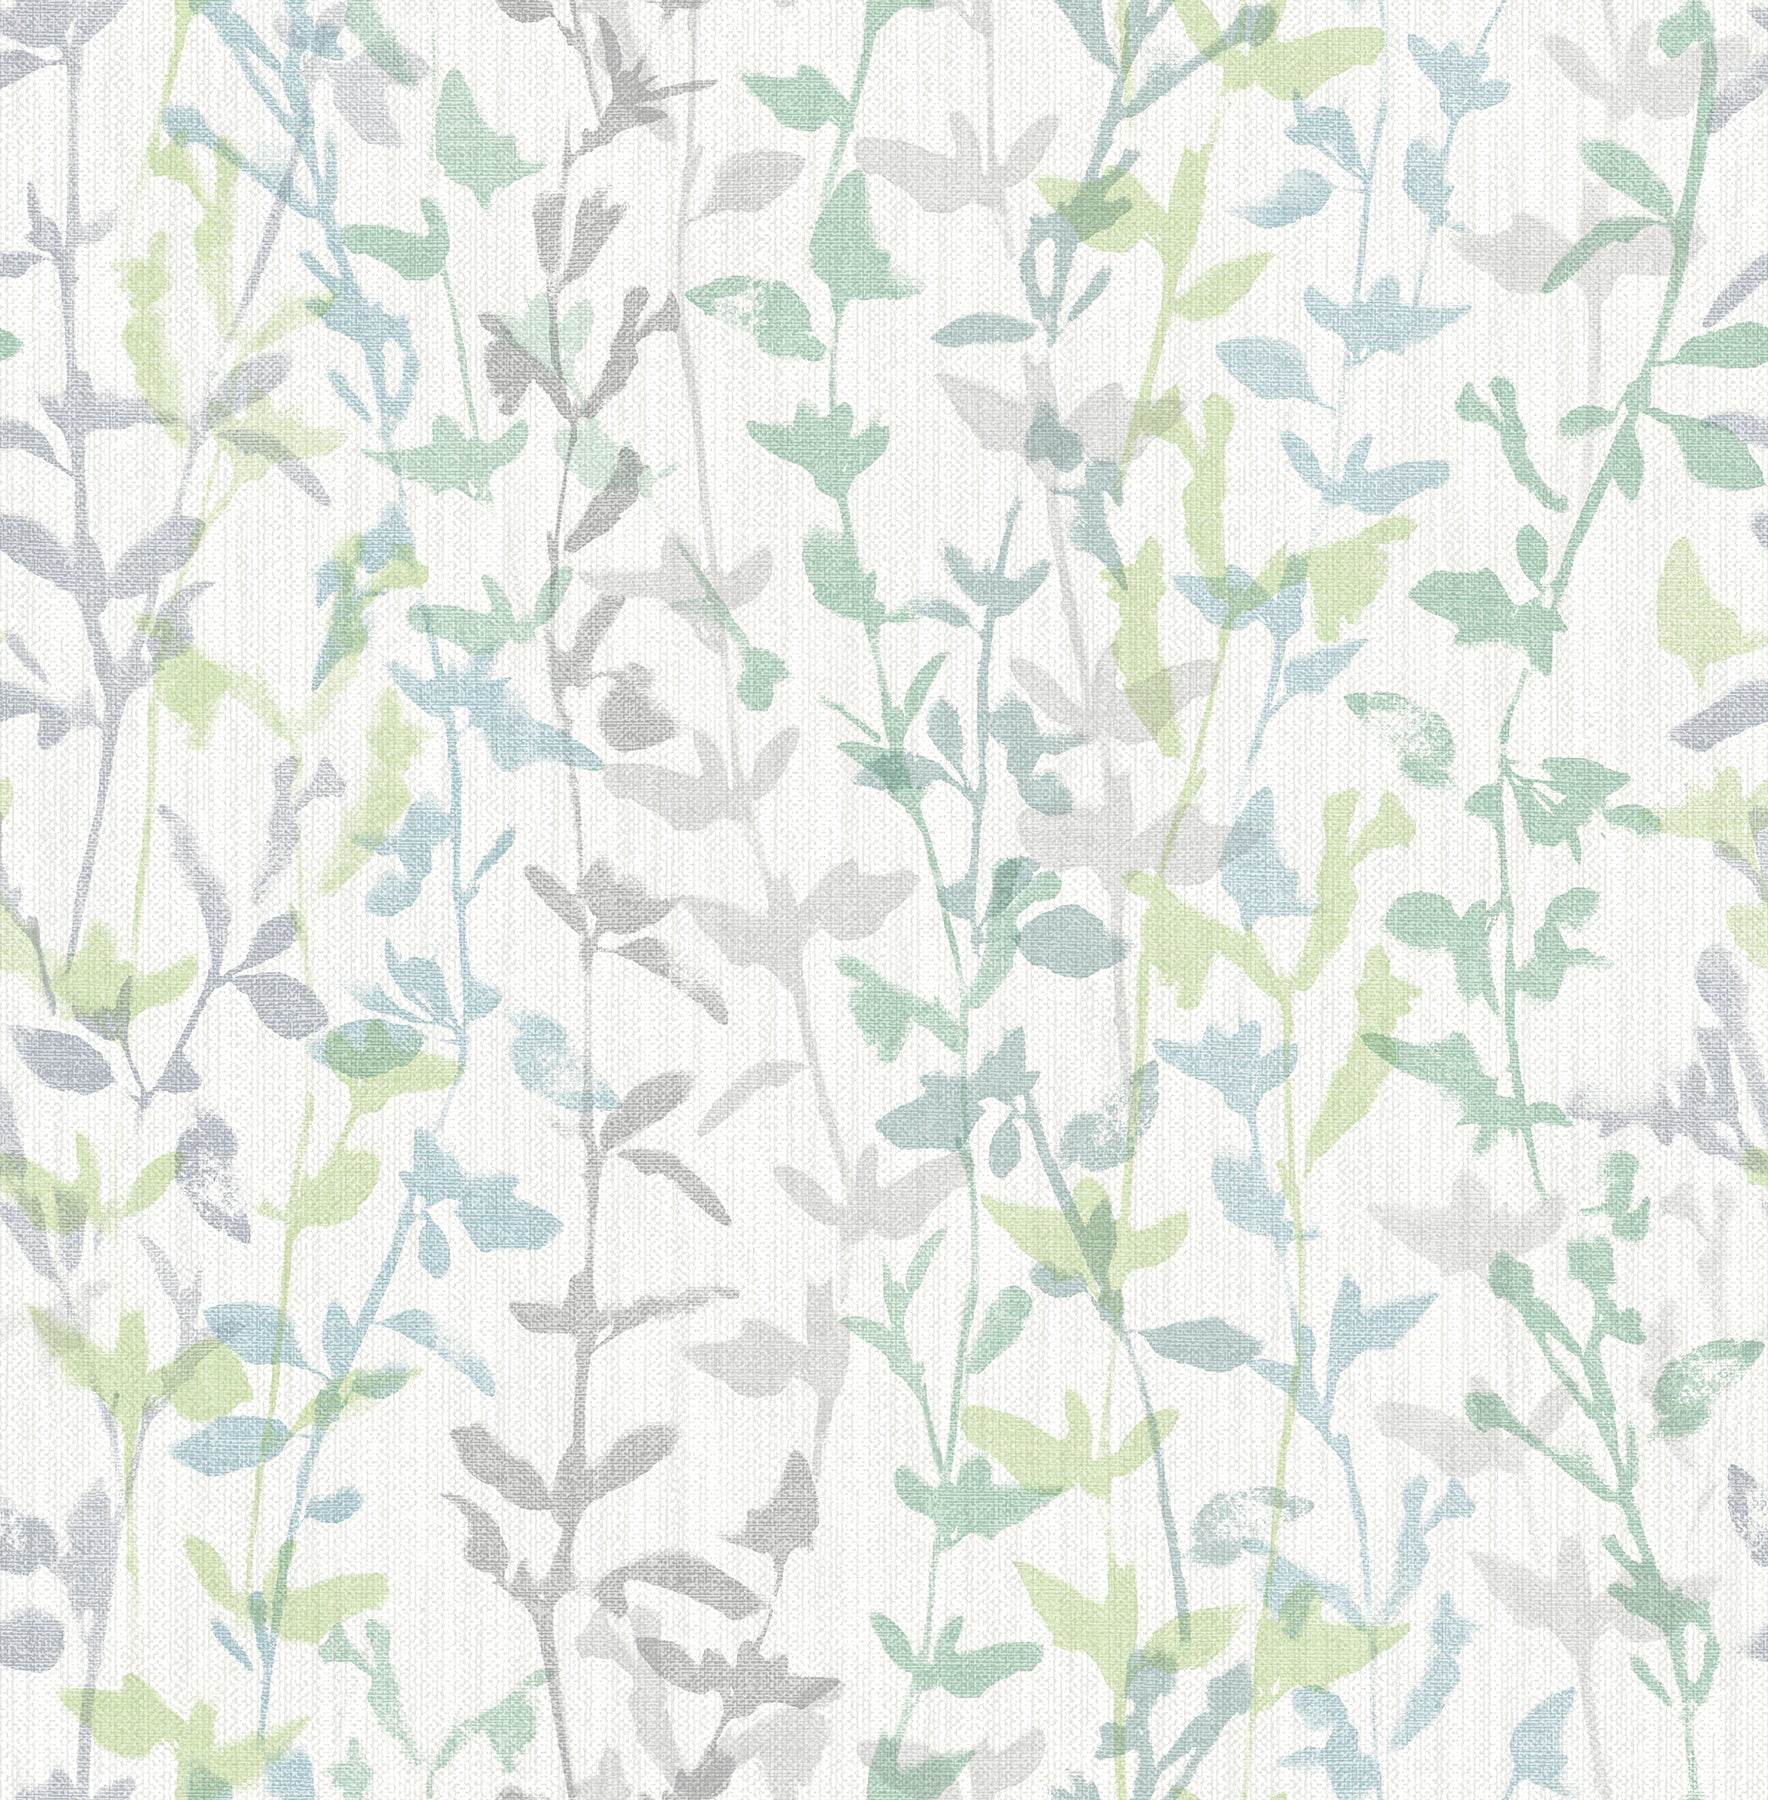 Looking for 2964-25937 Scott Living Thea Green Floral Trail Green A-Street Prints Wallpaper